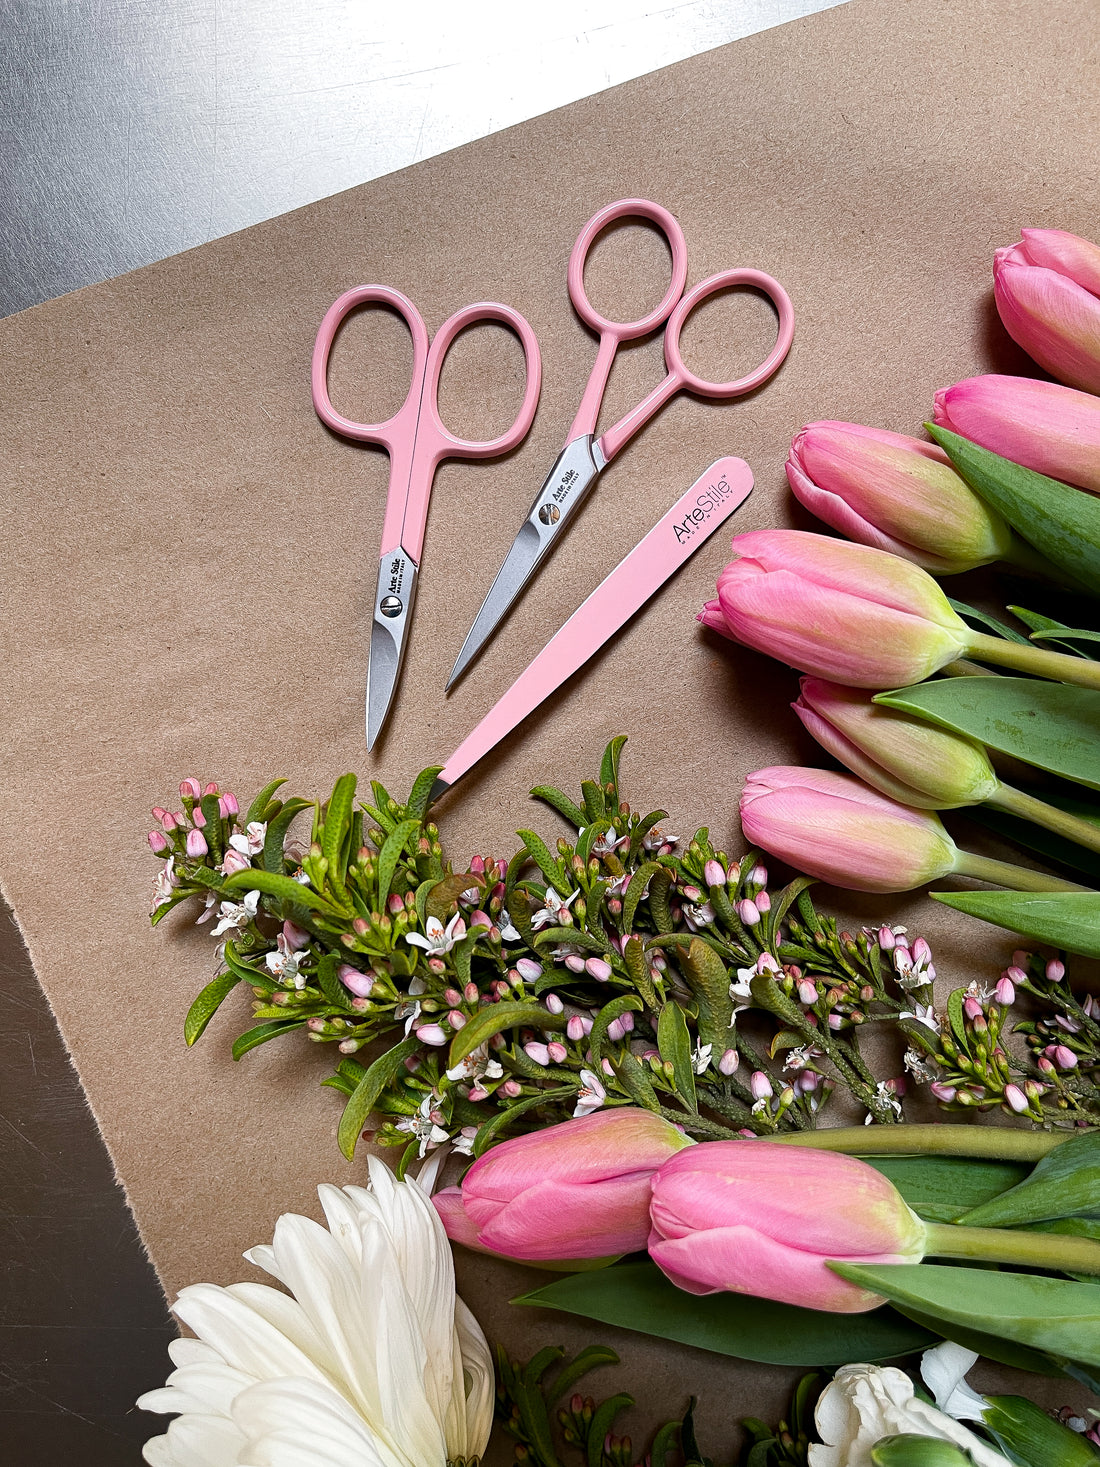 ArteStile Brow Scissors, ArteStile Nail Scissors, and ArteStile tweezers in rosé (light pink), on a brown wood table with pink tulips. 